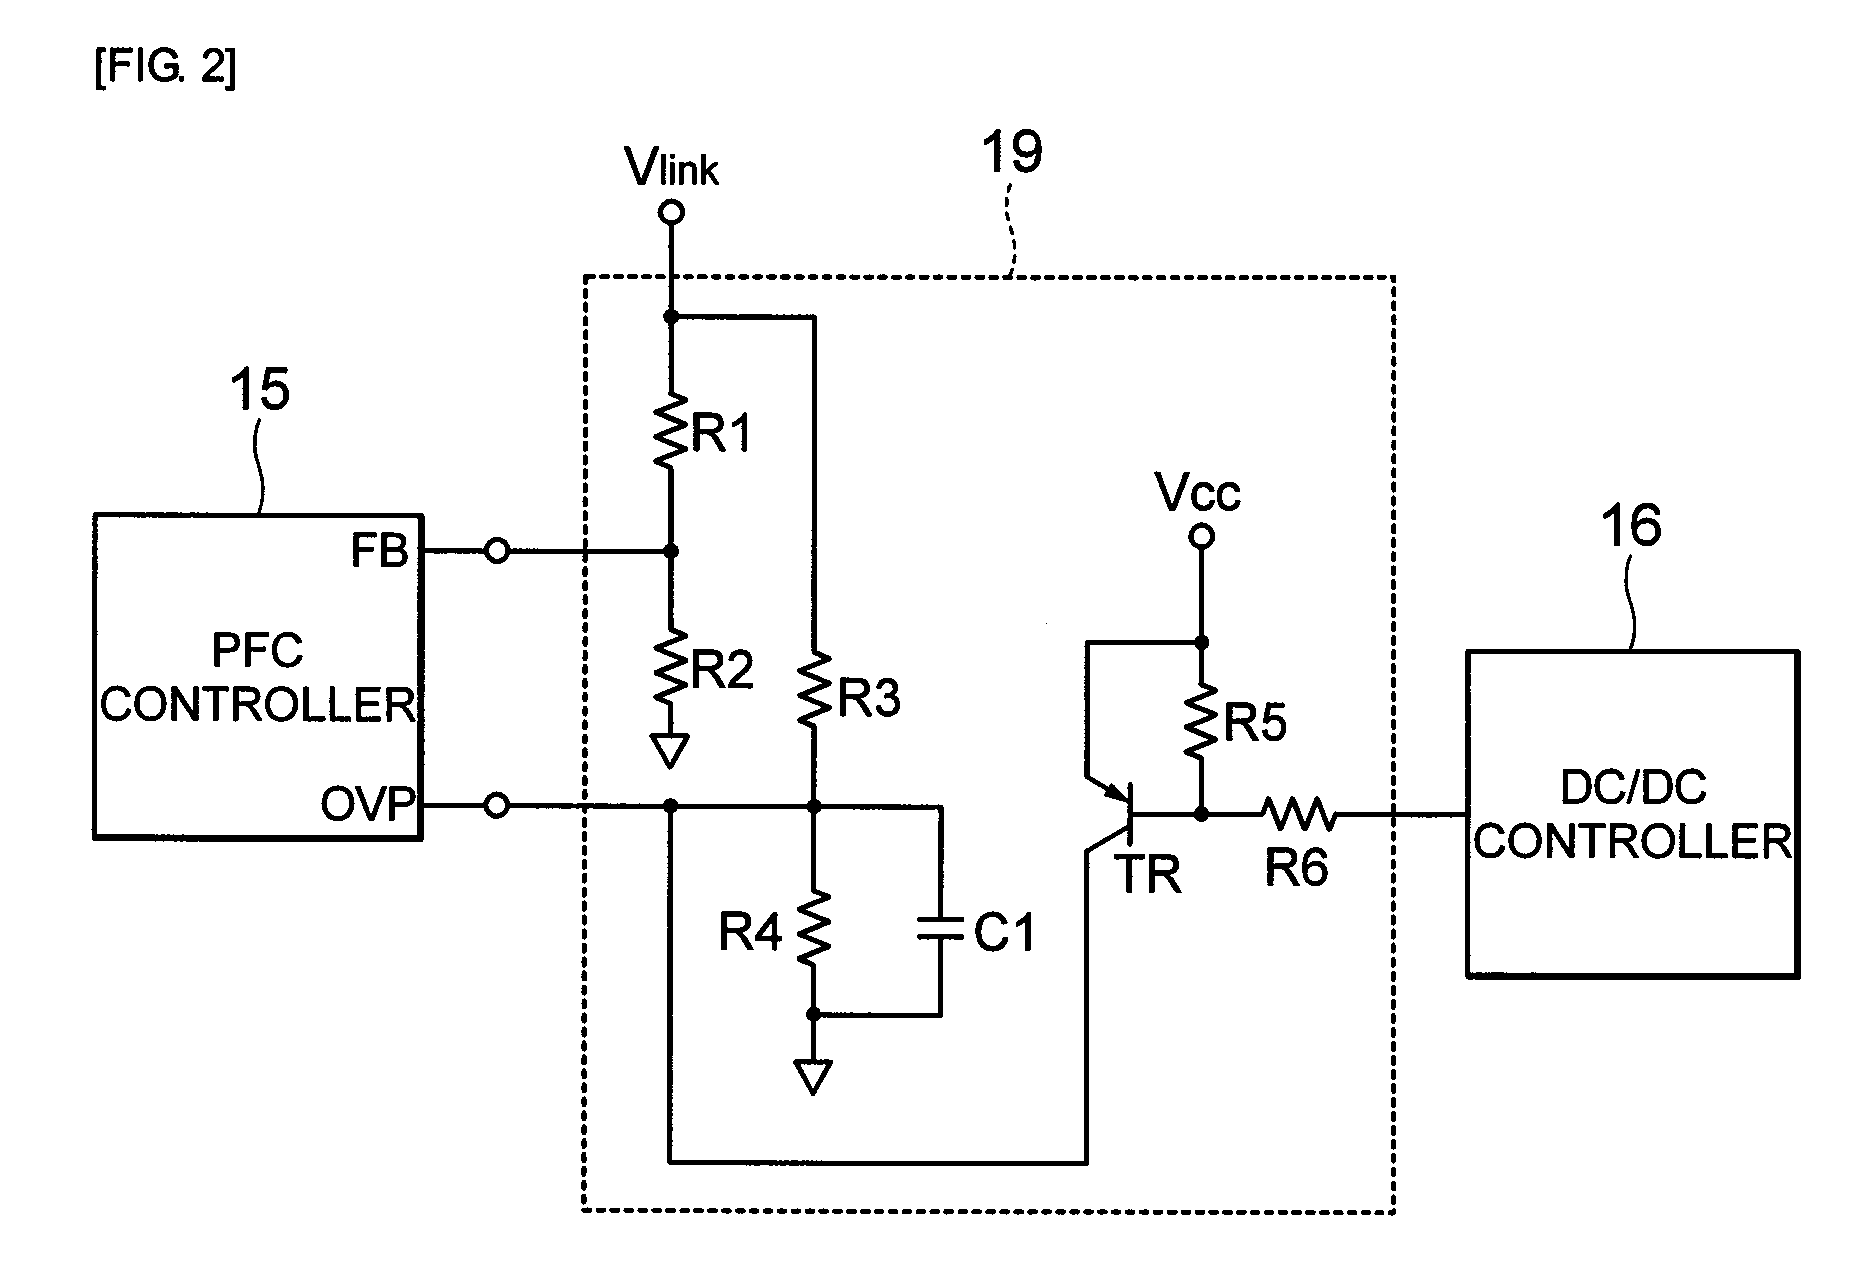 Switching mode power supply for reducing standby power